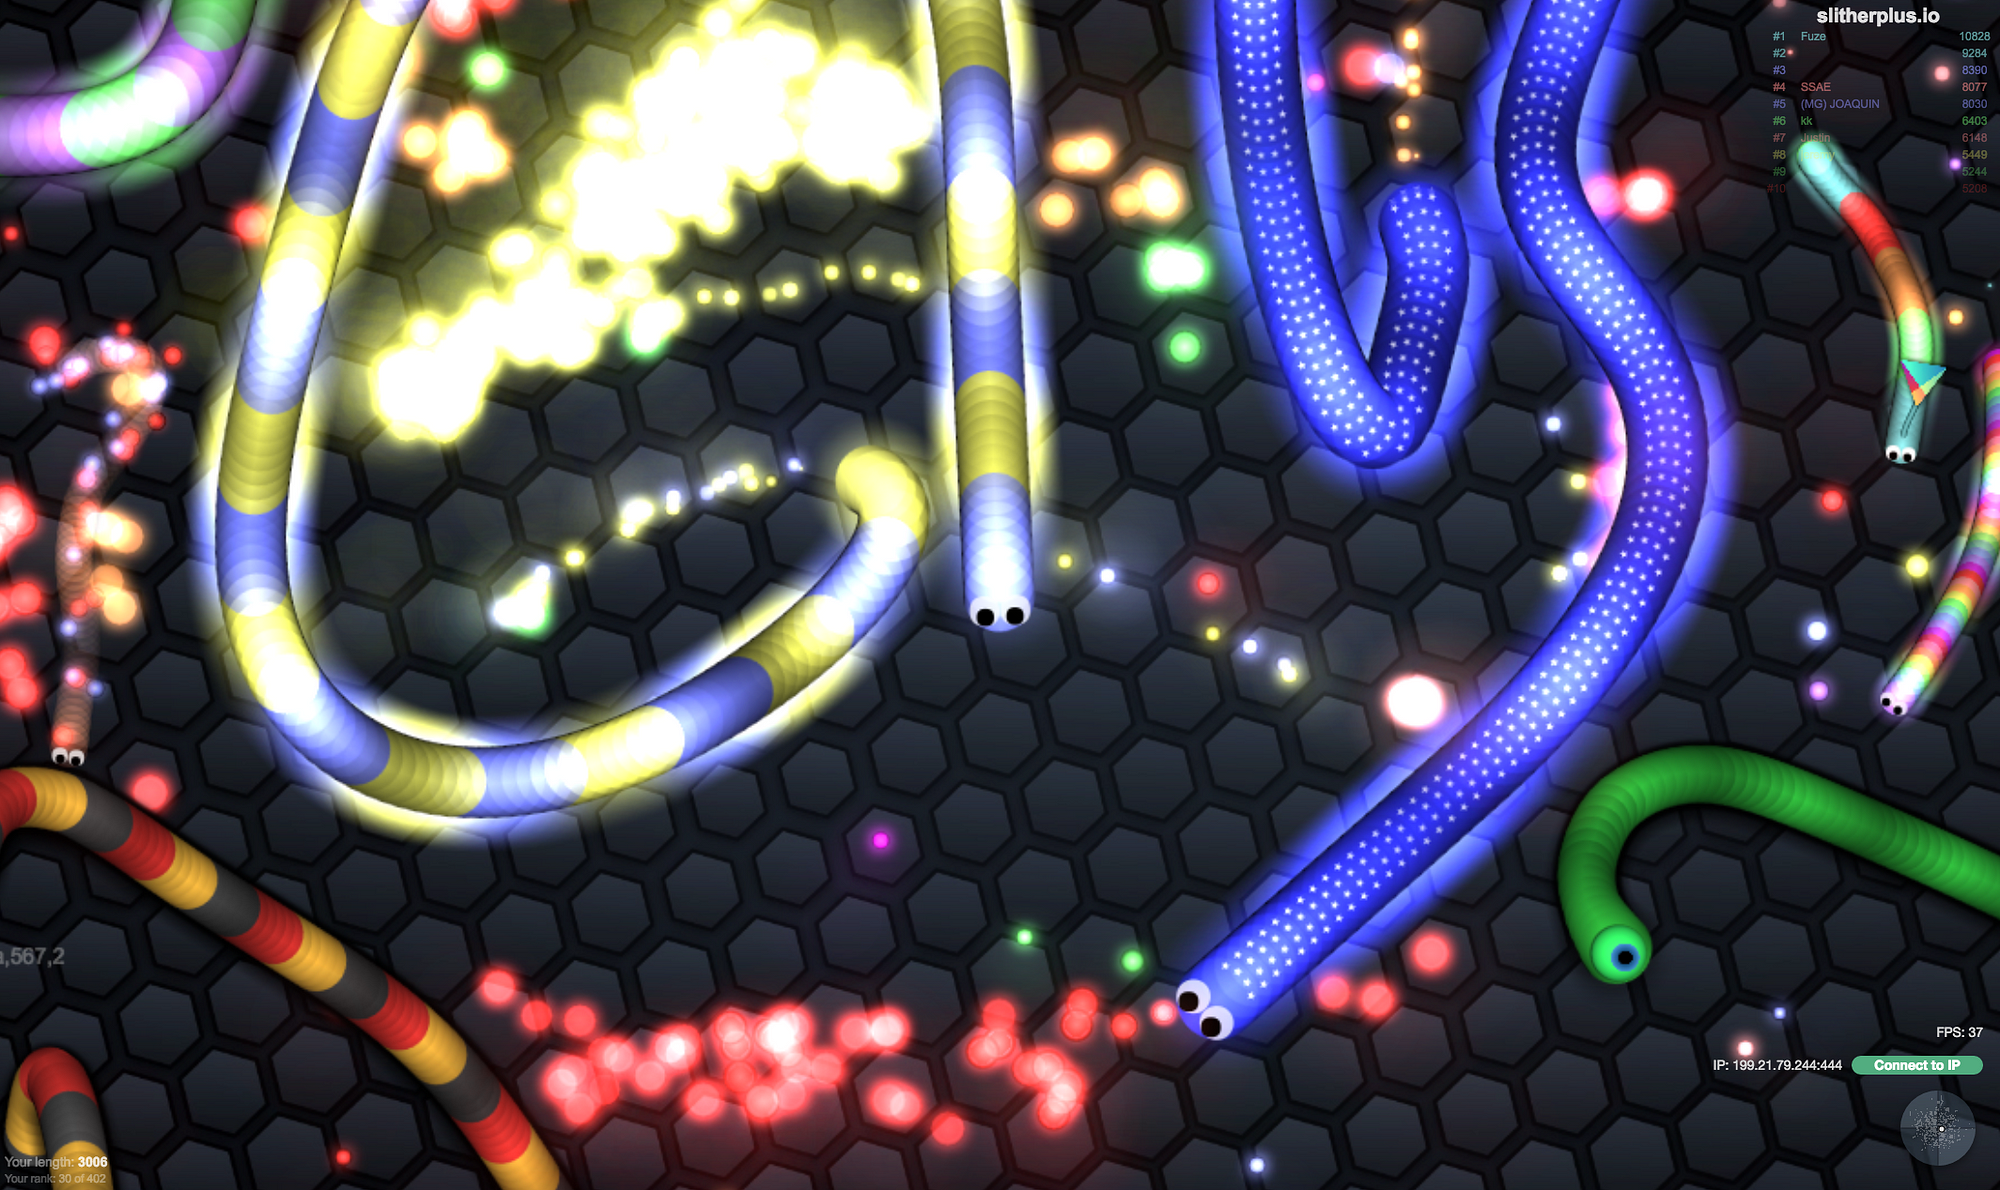 Slither.io - Play Slither.io Game Online